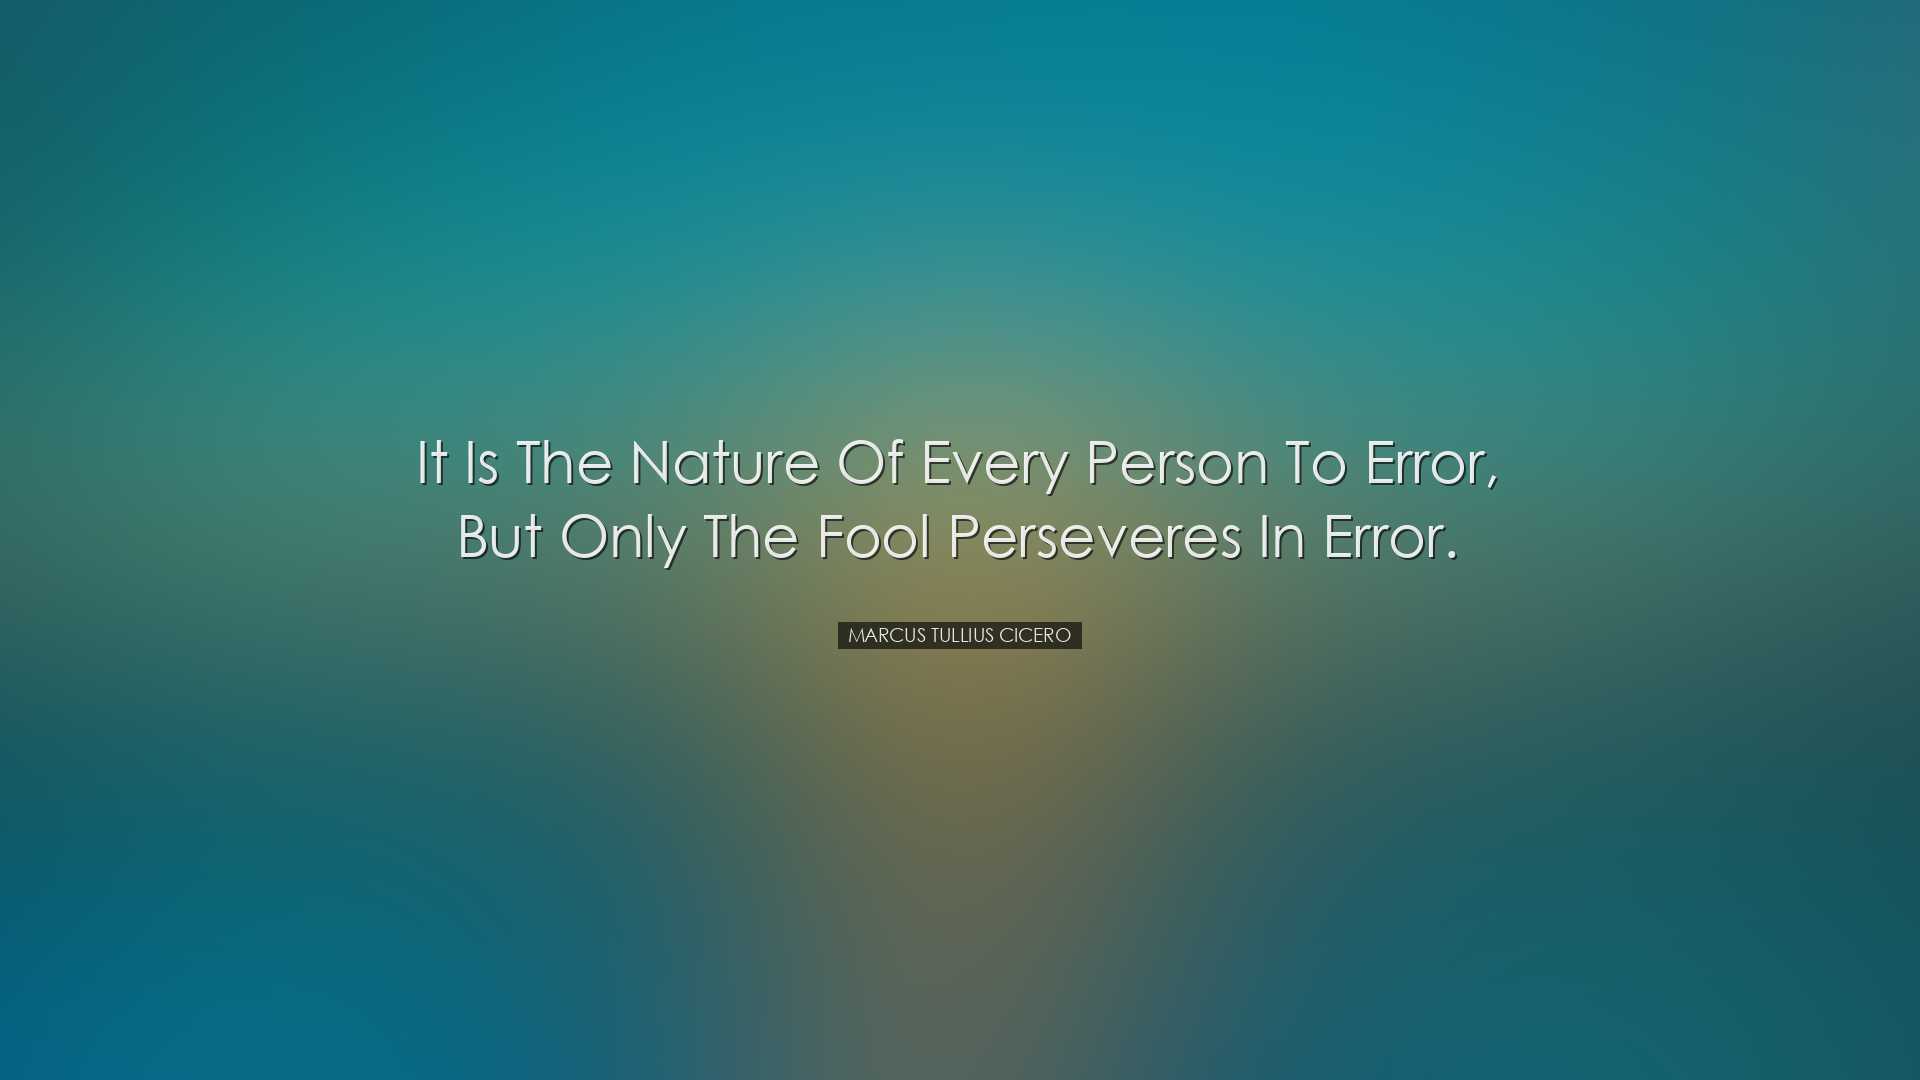 It is the nature of every person to error, but only the fool perse